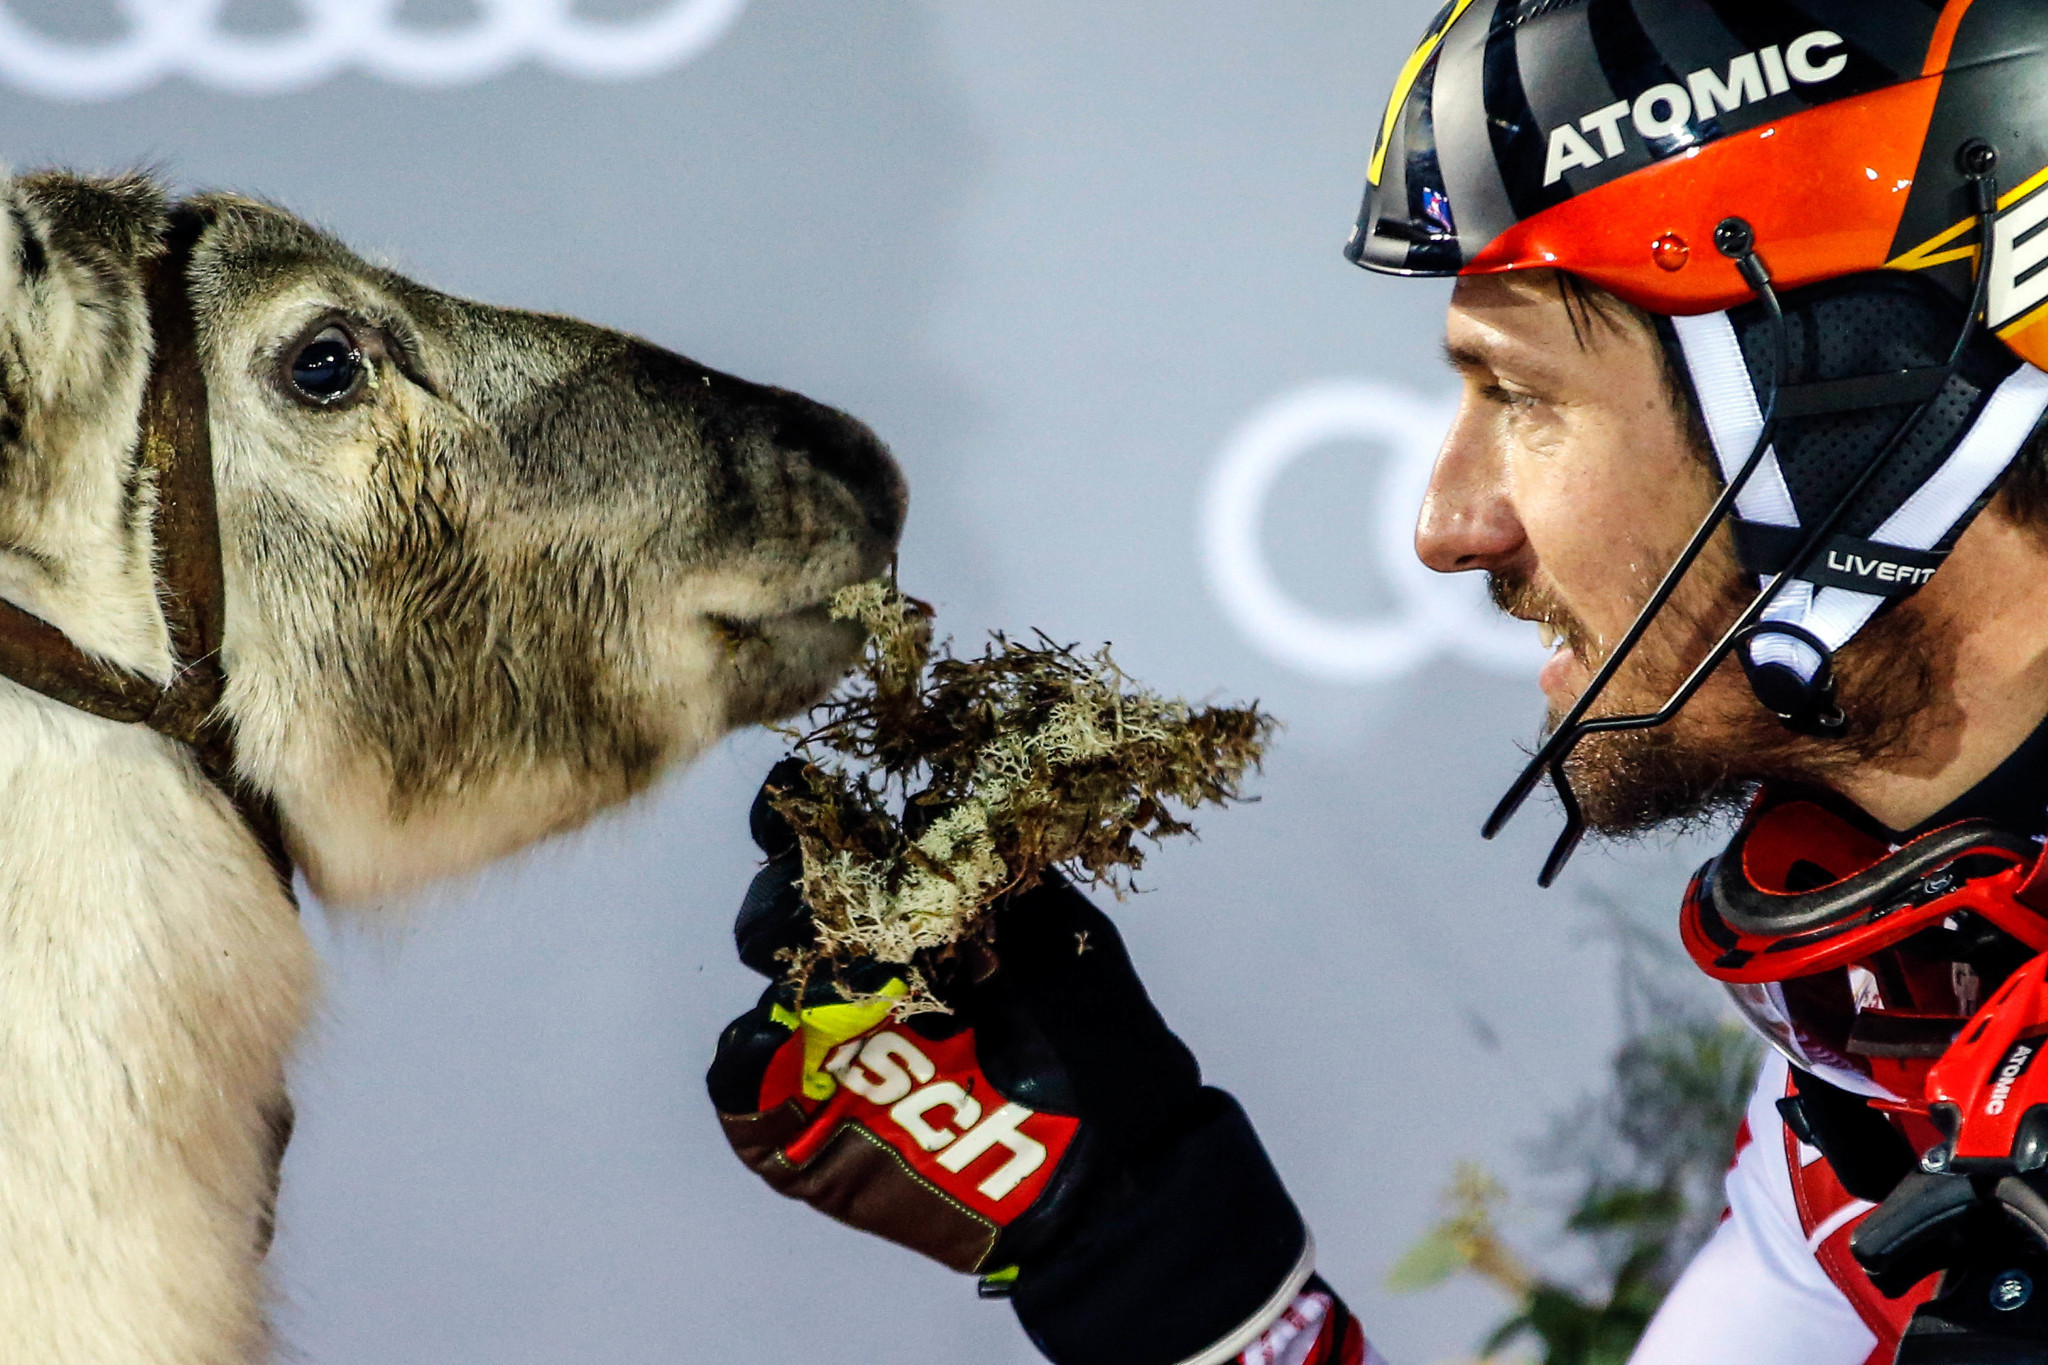 Austria's Marcel Hirscher won the slalom event at the FIS World Cup in Levi, Finland ©FIS